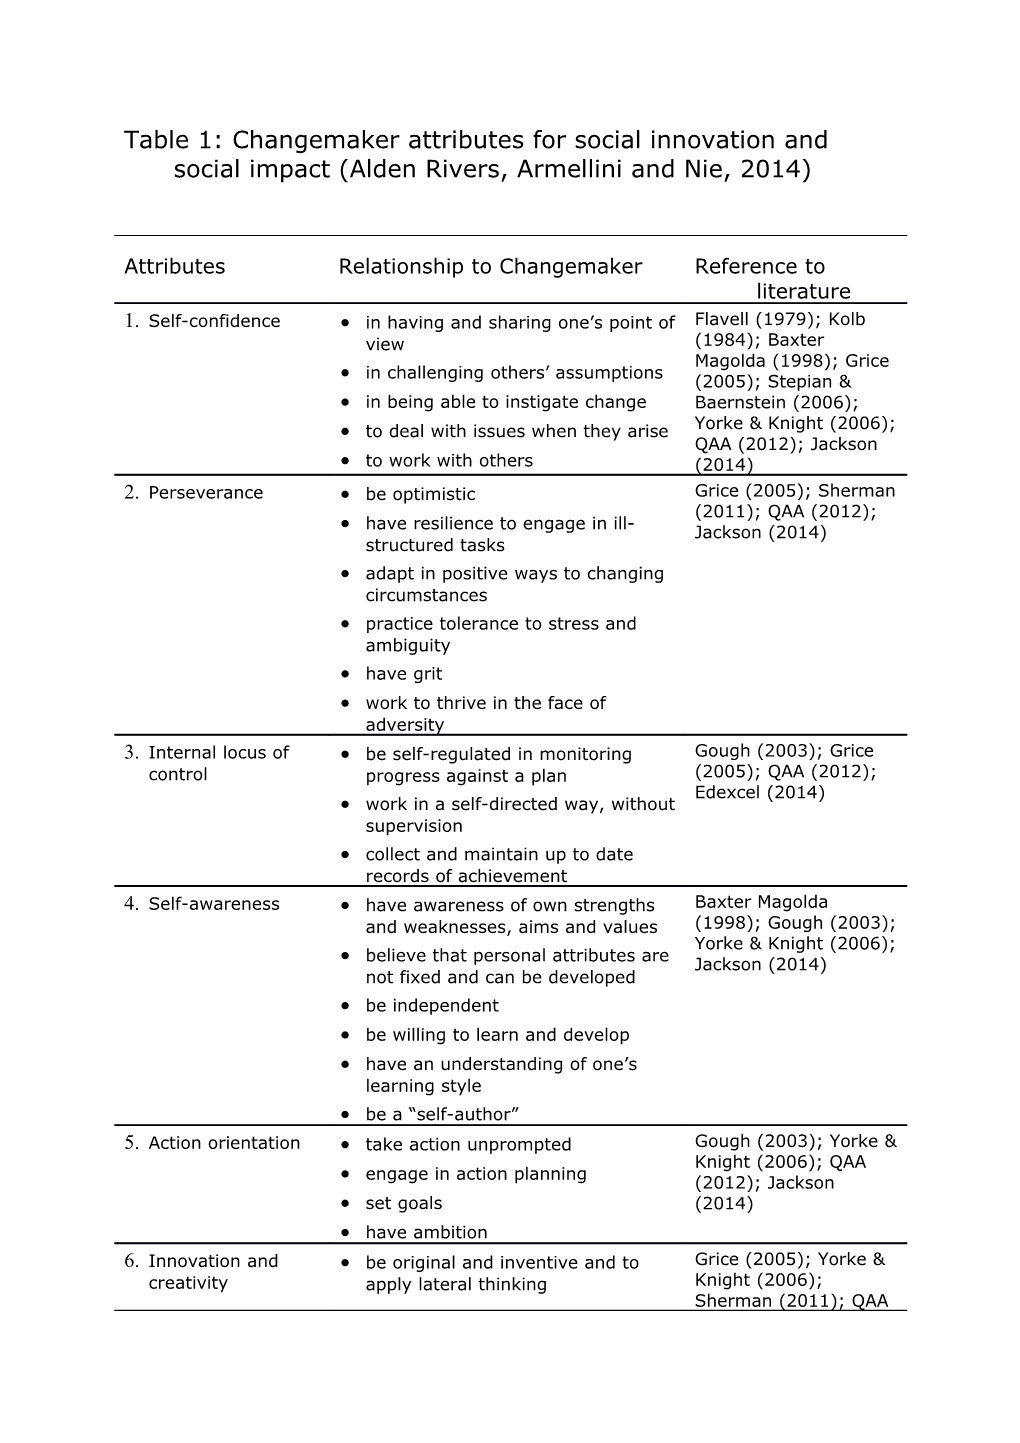 Table 1: Changemaker Attributes for Social Innovation and Social Impact (Alden Rivers